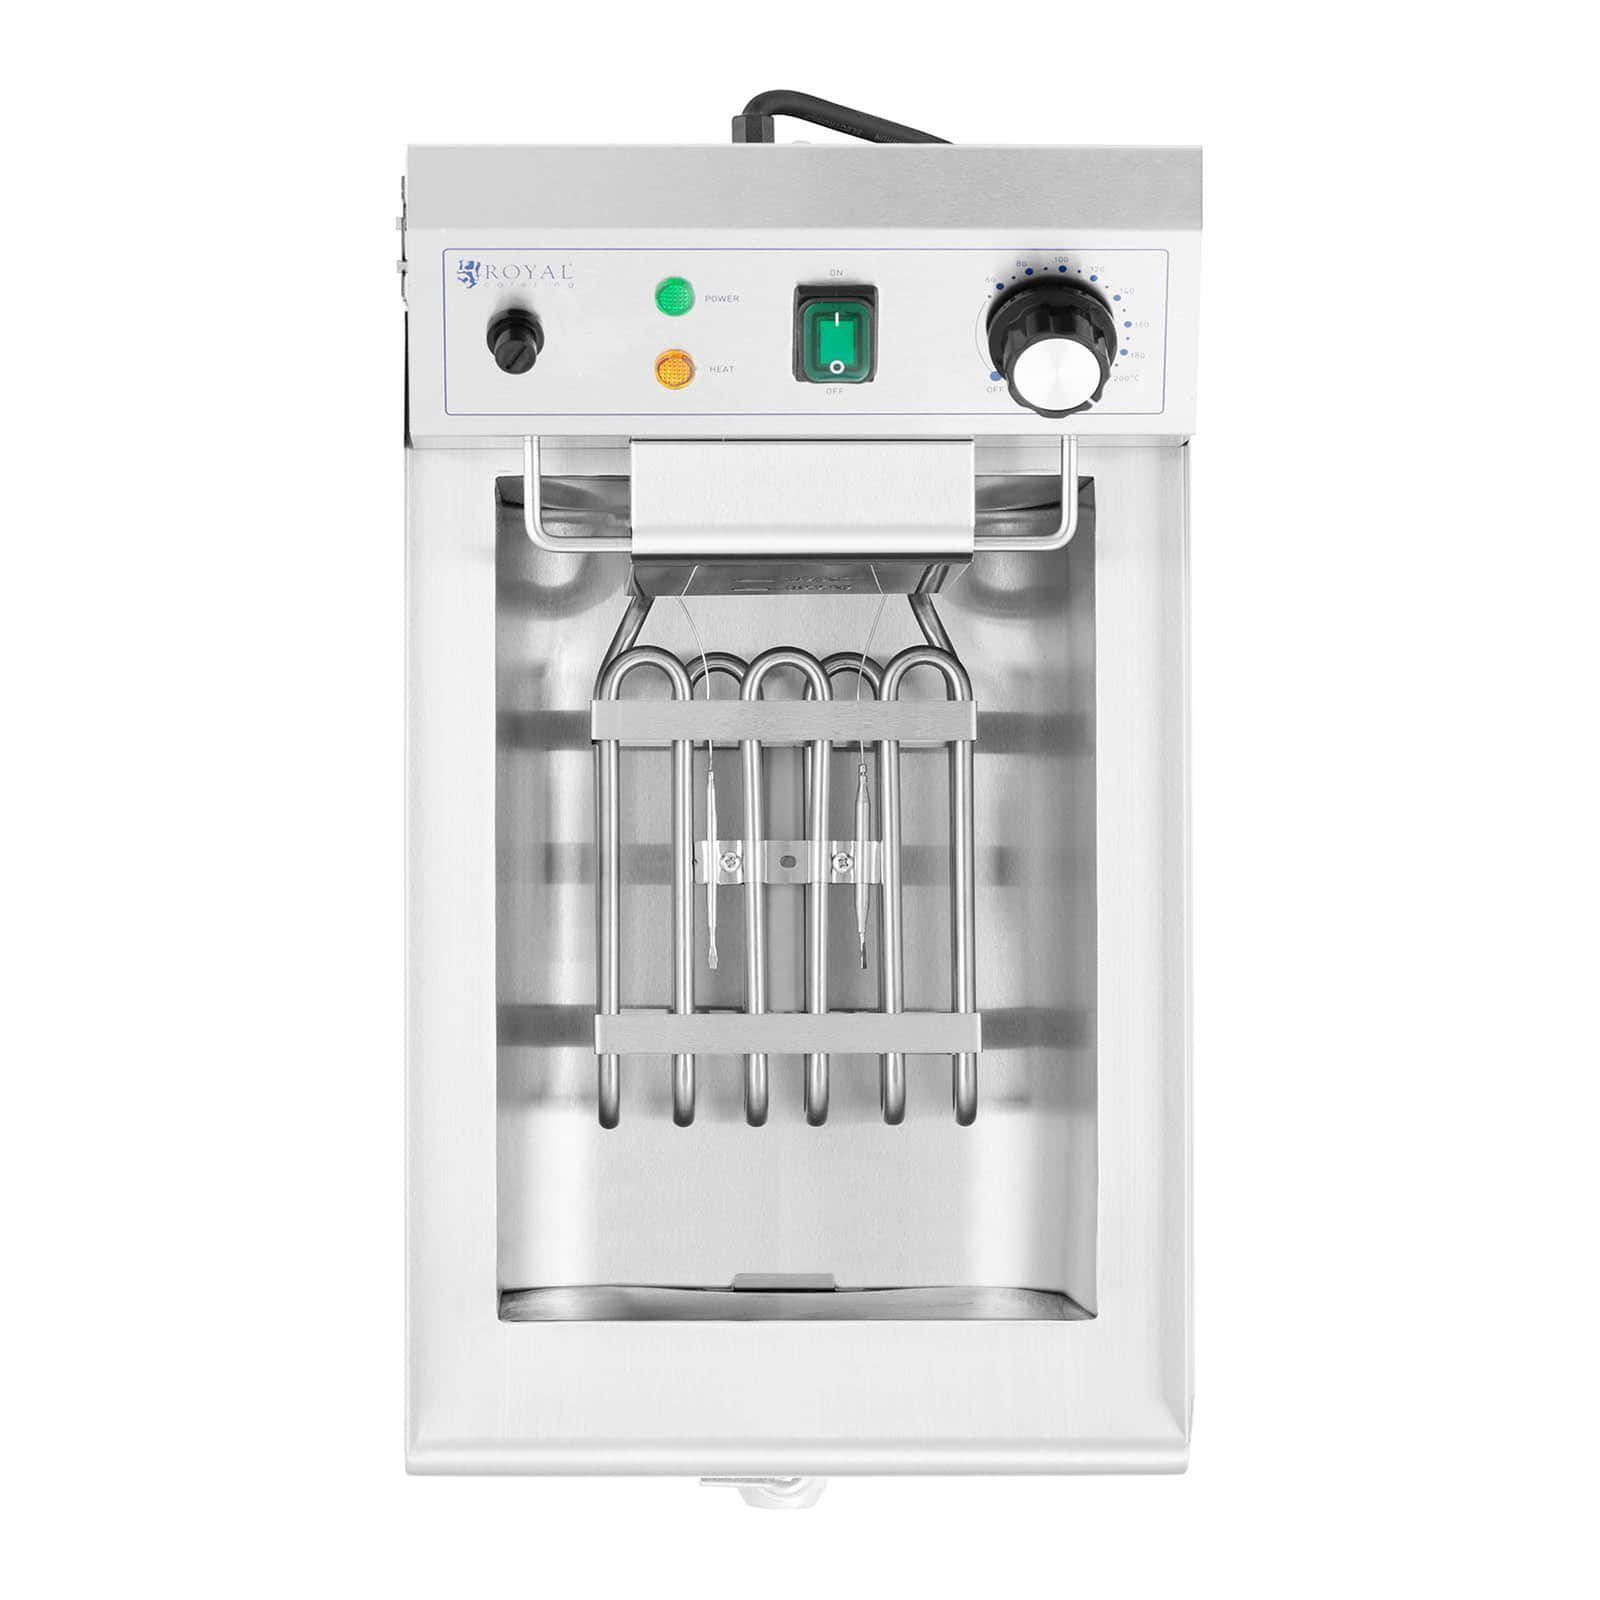 3.000 9 W Fritteuse Royal Catering Fritteuse Elektro-Fritteuse Kaltzonen L Fritteuse W, 3000 Gastro